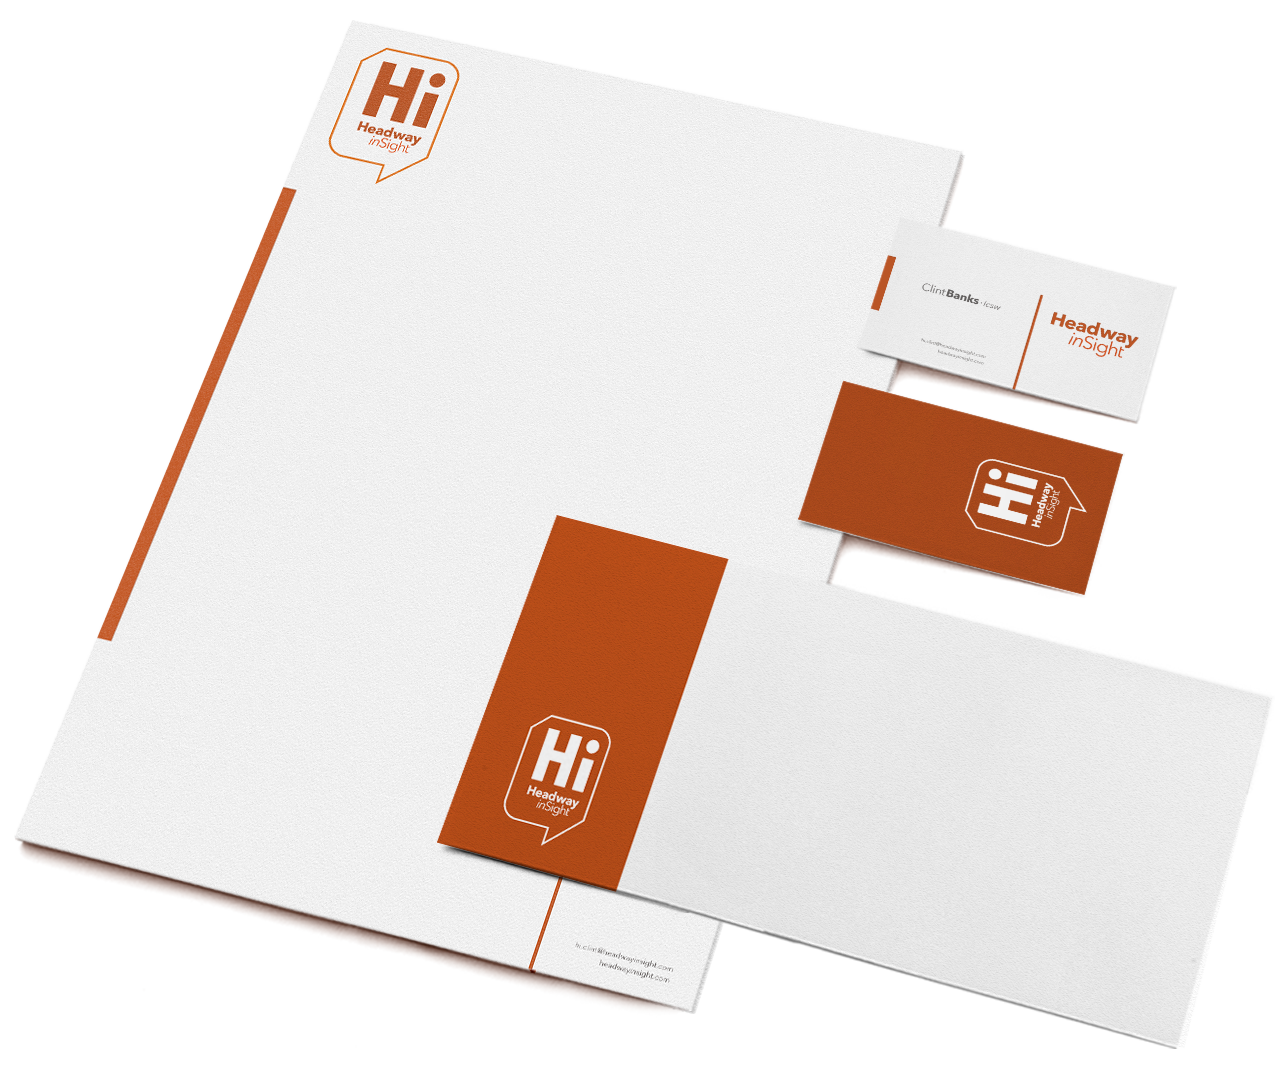 suite76-headway-insight-stationary-1280×1080-1